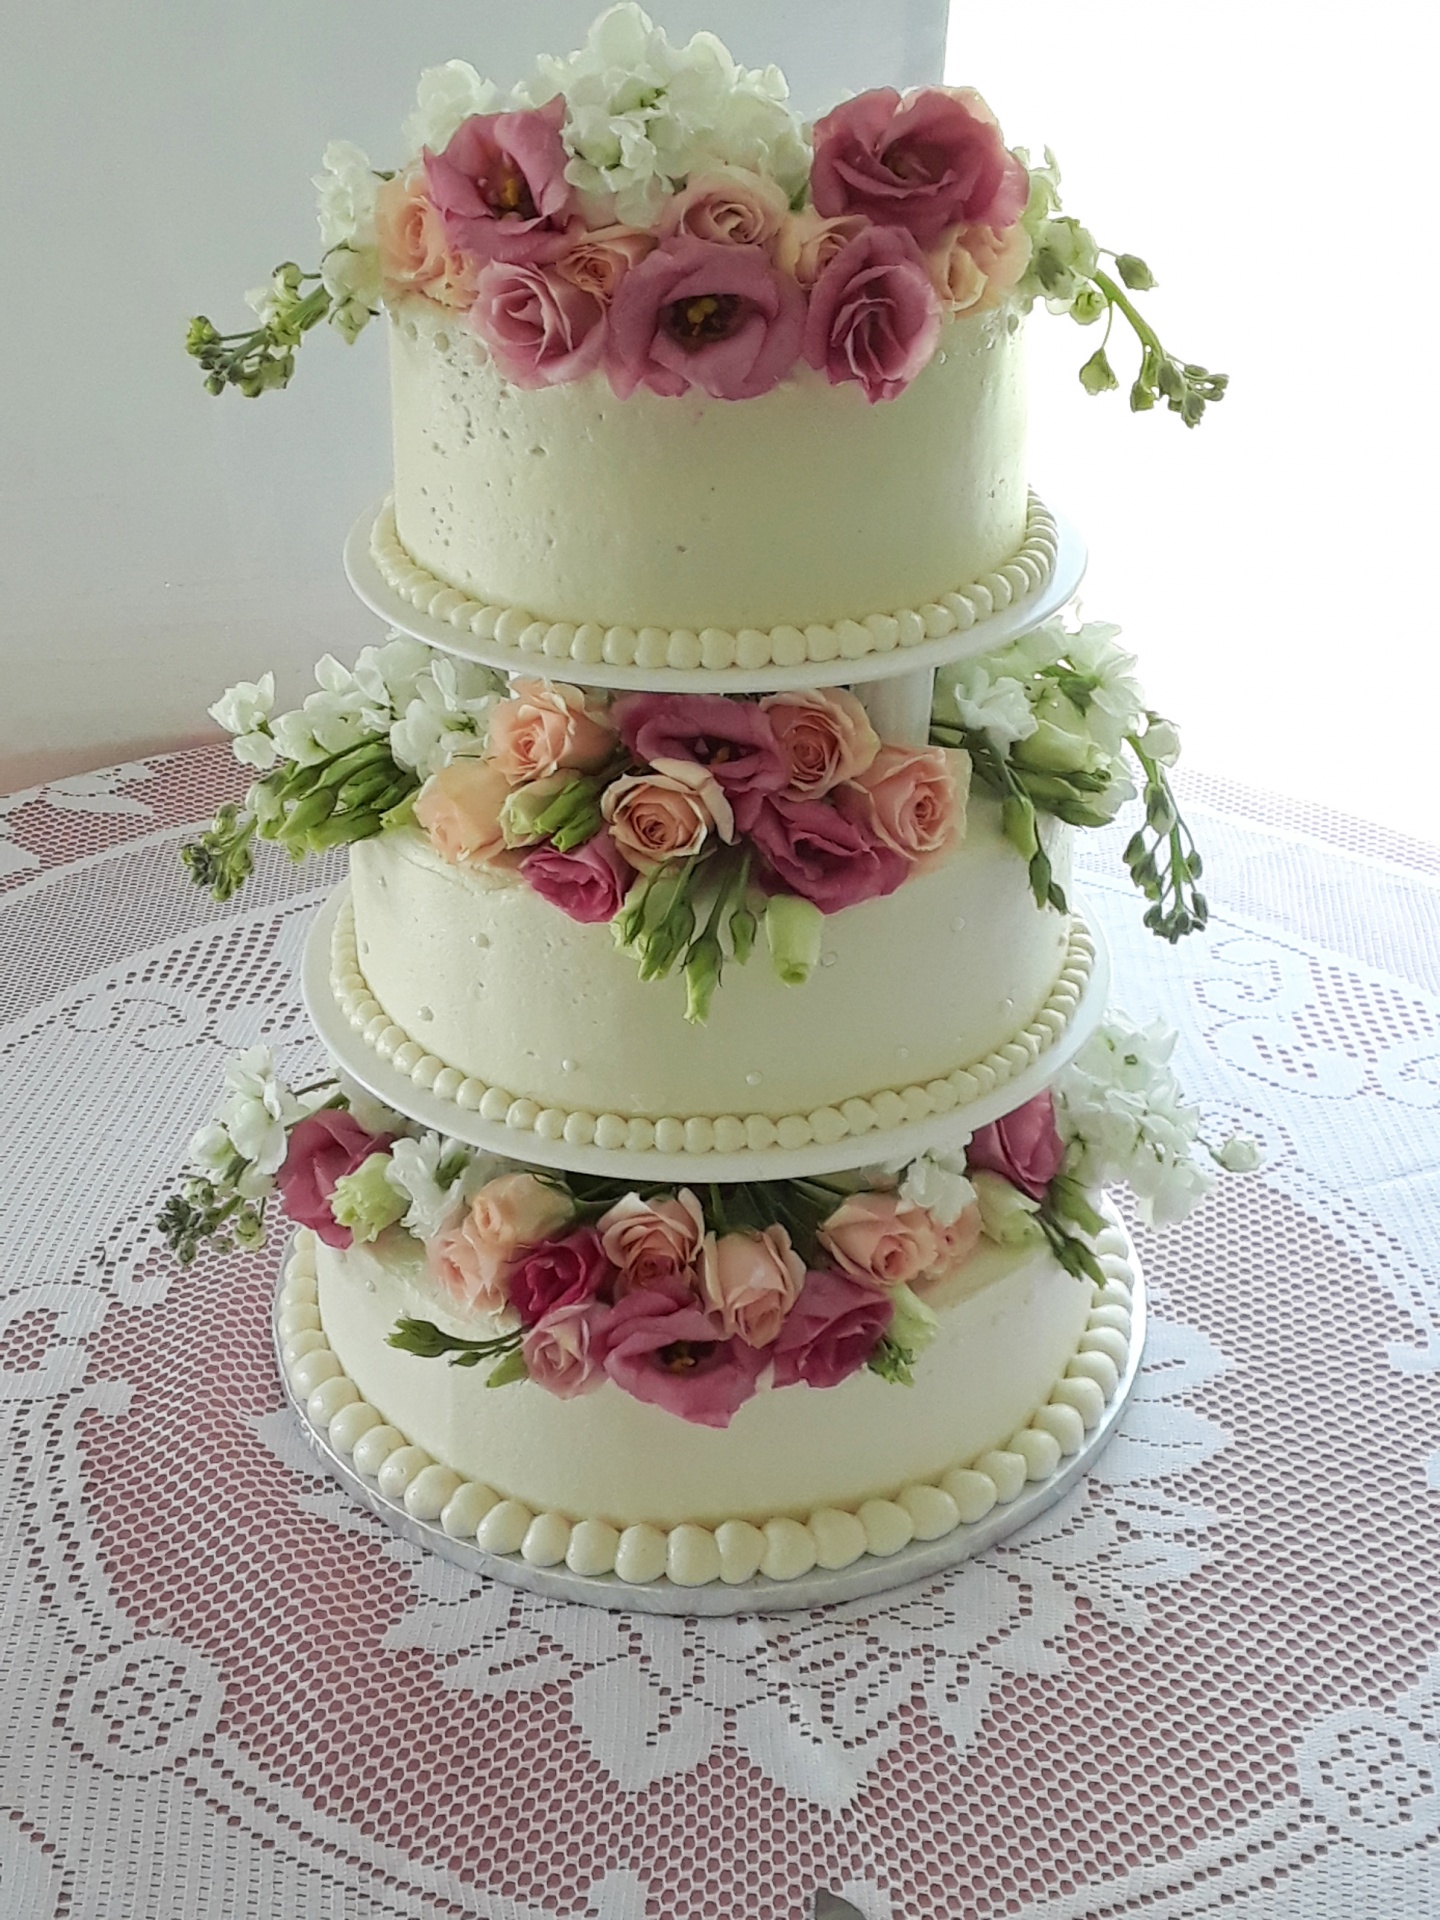 Wedding cake with white frosting, tiers, and fresh flowers